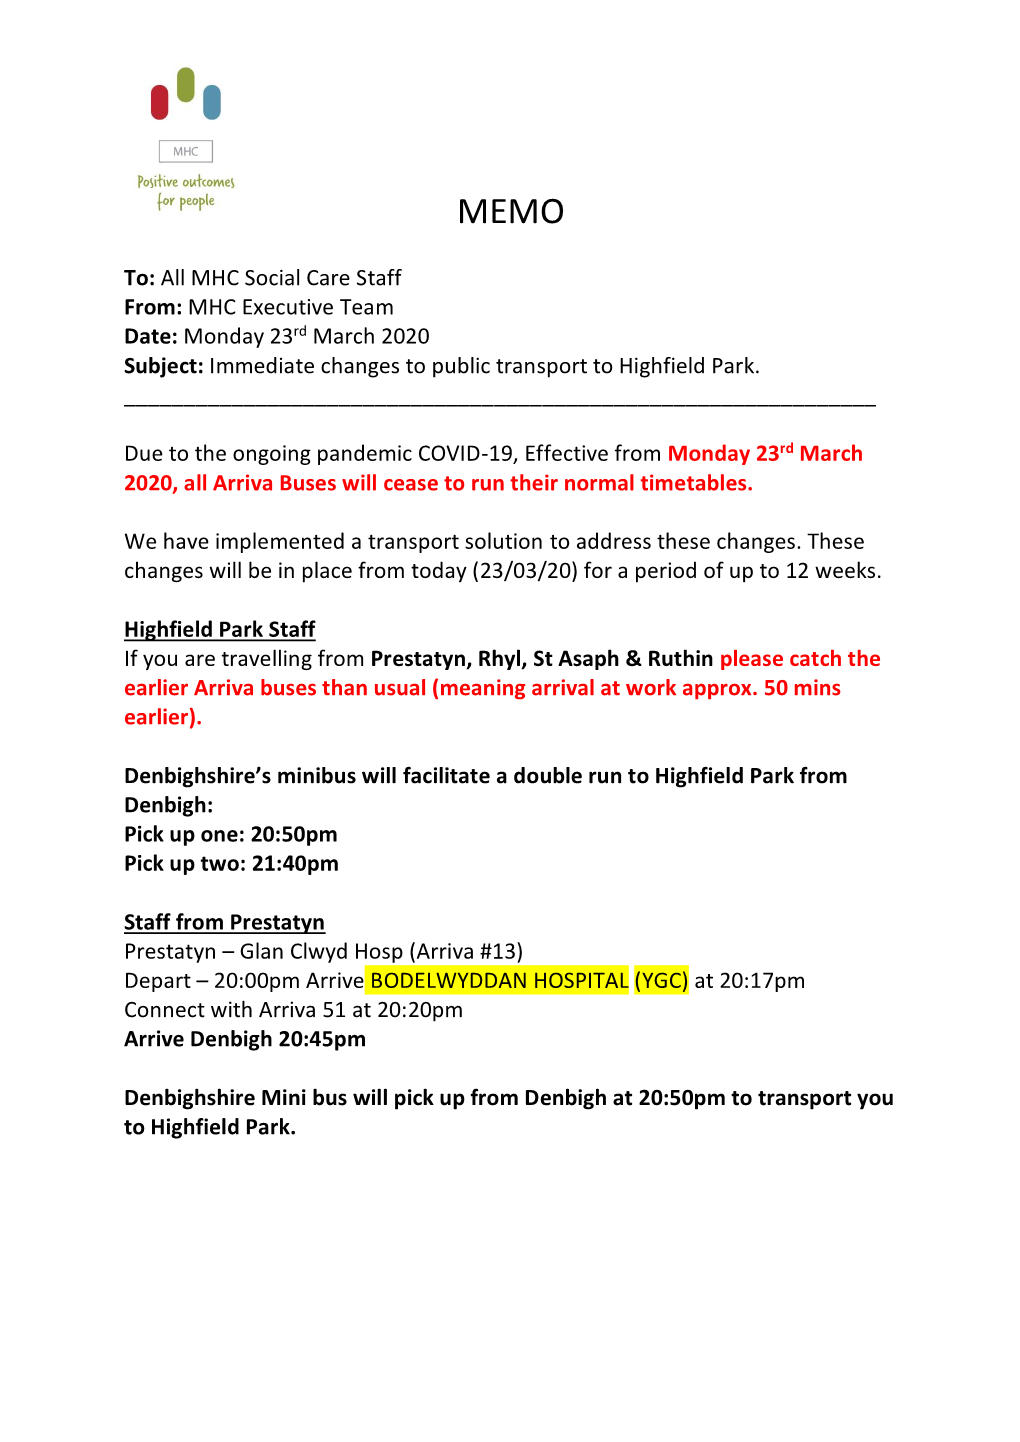 To: All MHC Social Care Staff From: MHC Executive Team Date: Monday 23Rd March 2020 Subject: Immediate Changes to Public Transport to Highfield Park